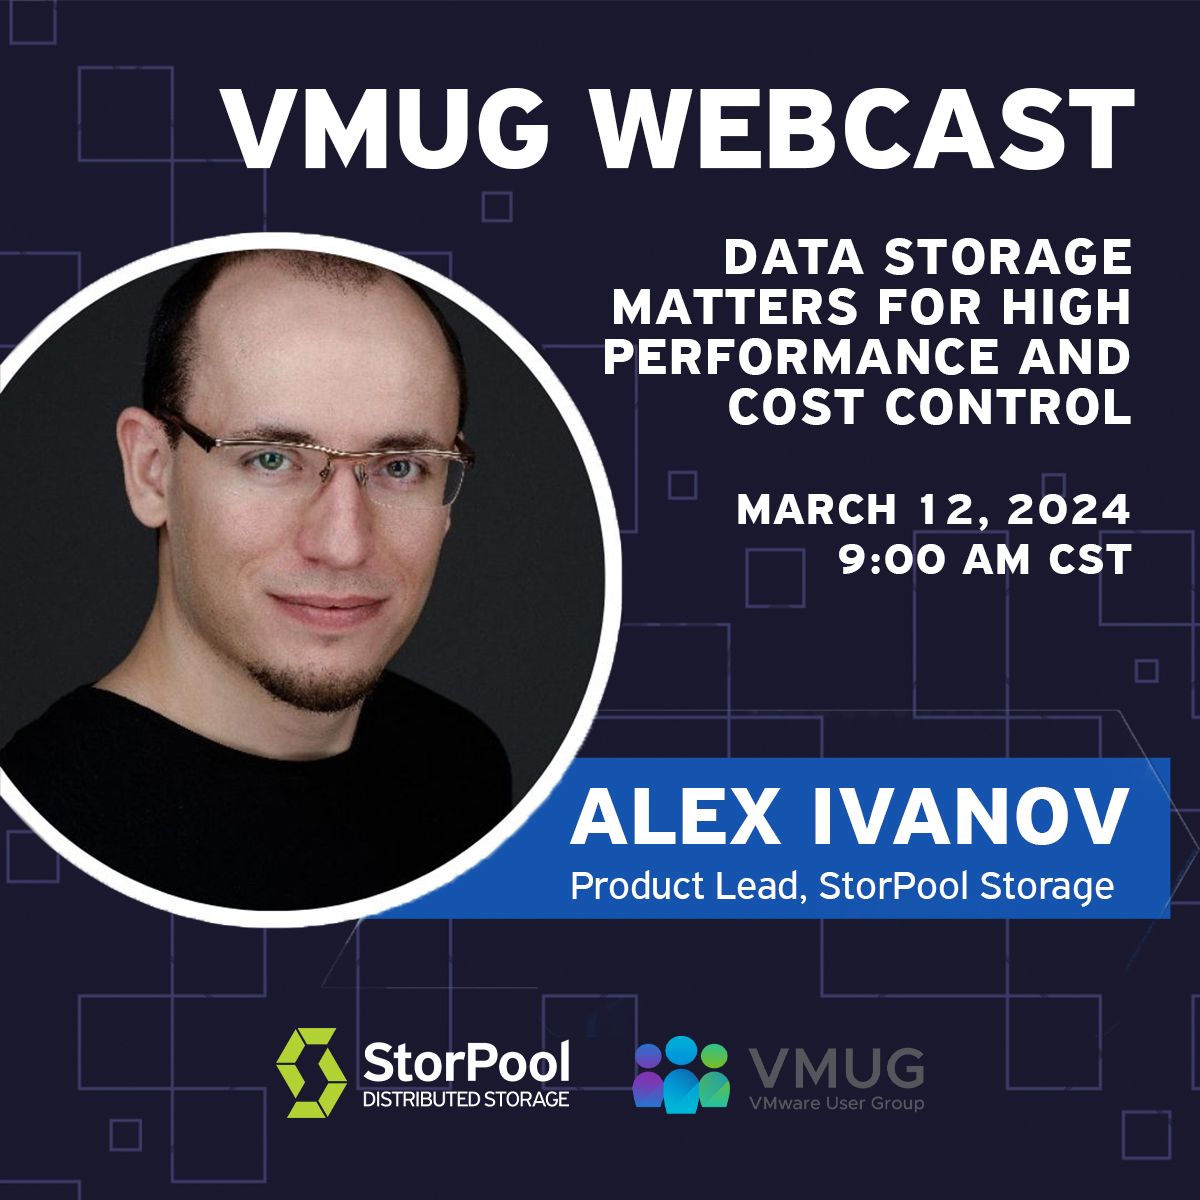 Join us for a resourceful discussion on navigating block storage that delivers the speed, reliability, and agility required by modern cloud infrastructure.

👉 hubs.ly/Q02nPYjJ0 

#StorPoolStorage #VMUG #VMware #BlockStorage #SoftwareDefinedStorage #Webinar #BulgariaTech